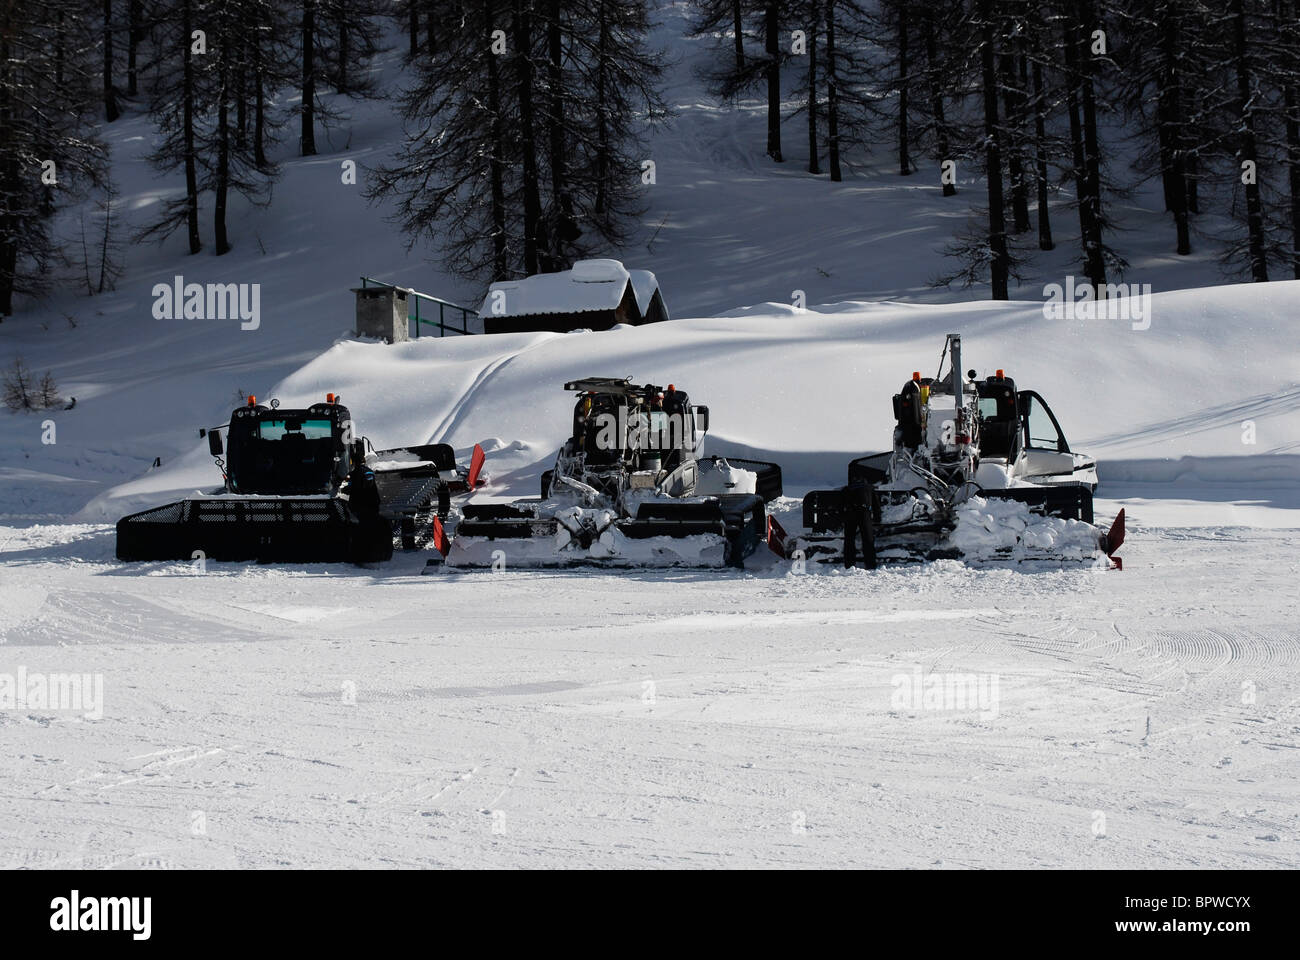 Winter sport. Skiing Sauze D'Oulx, Italy. Piste basher or bully. Tracked machine to prepare the piste or ski slope for skiing Stock Photo